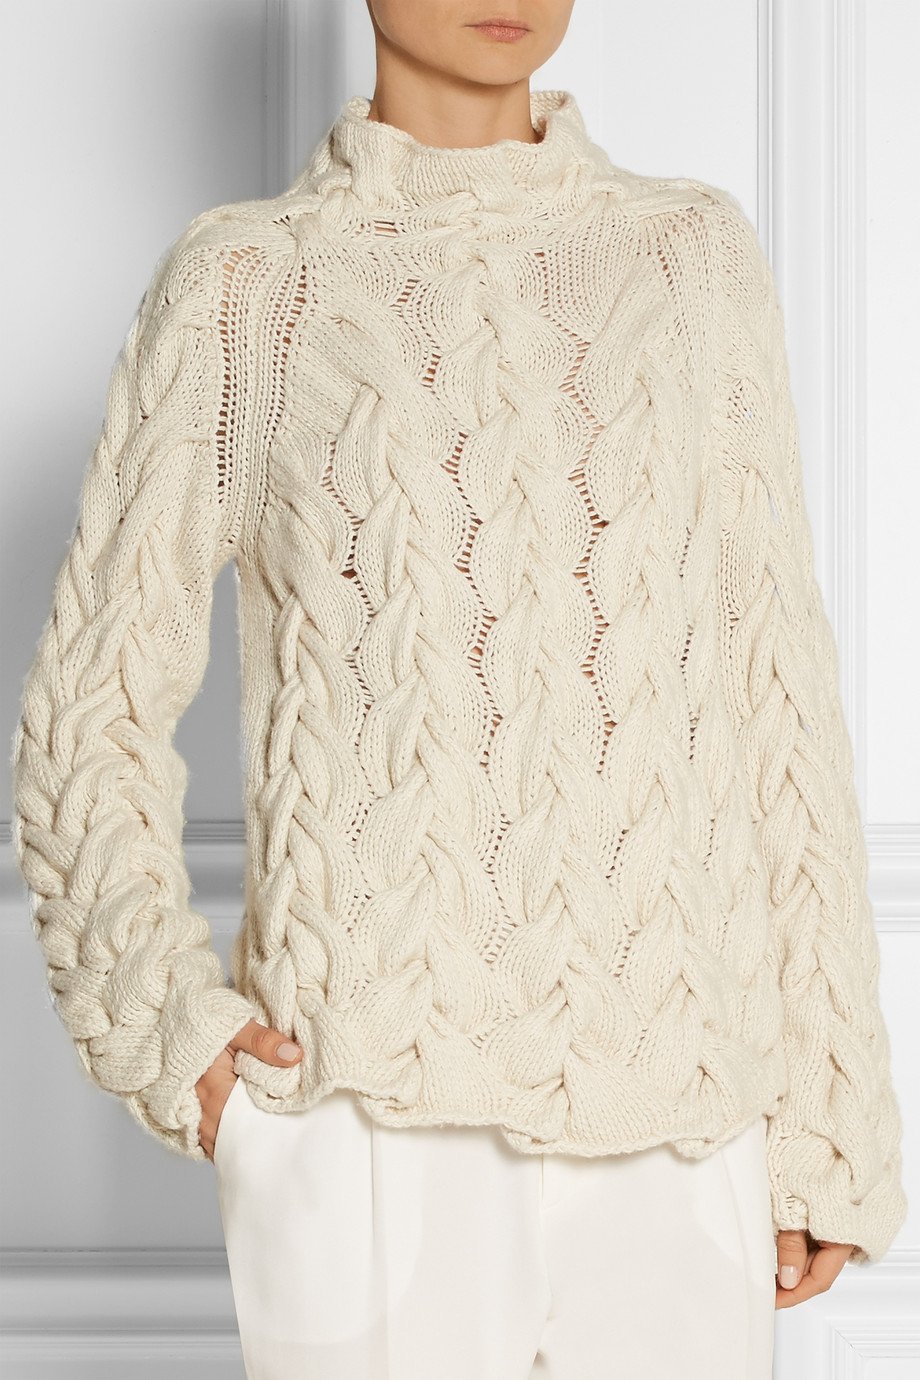 Lyst - The Row Leander Cable-Knit Cashmere And Silk-Blend Sweater in White